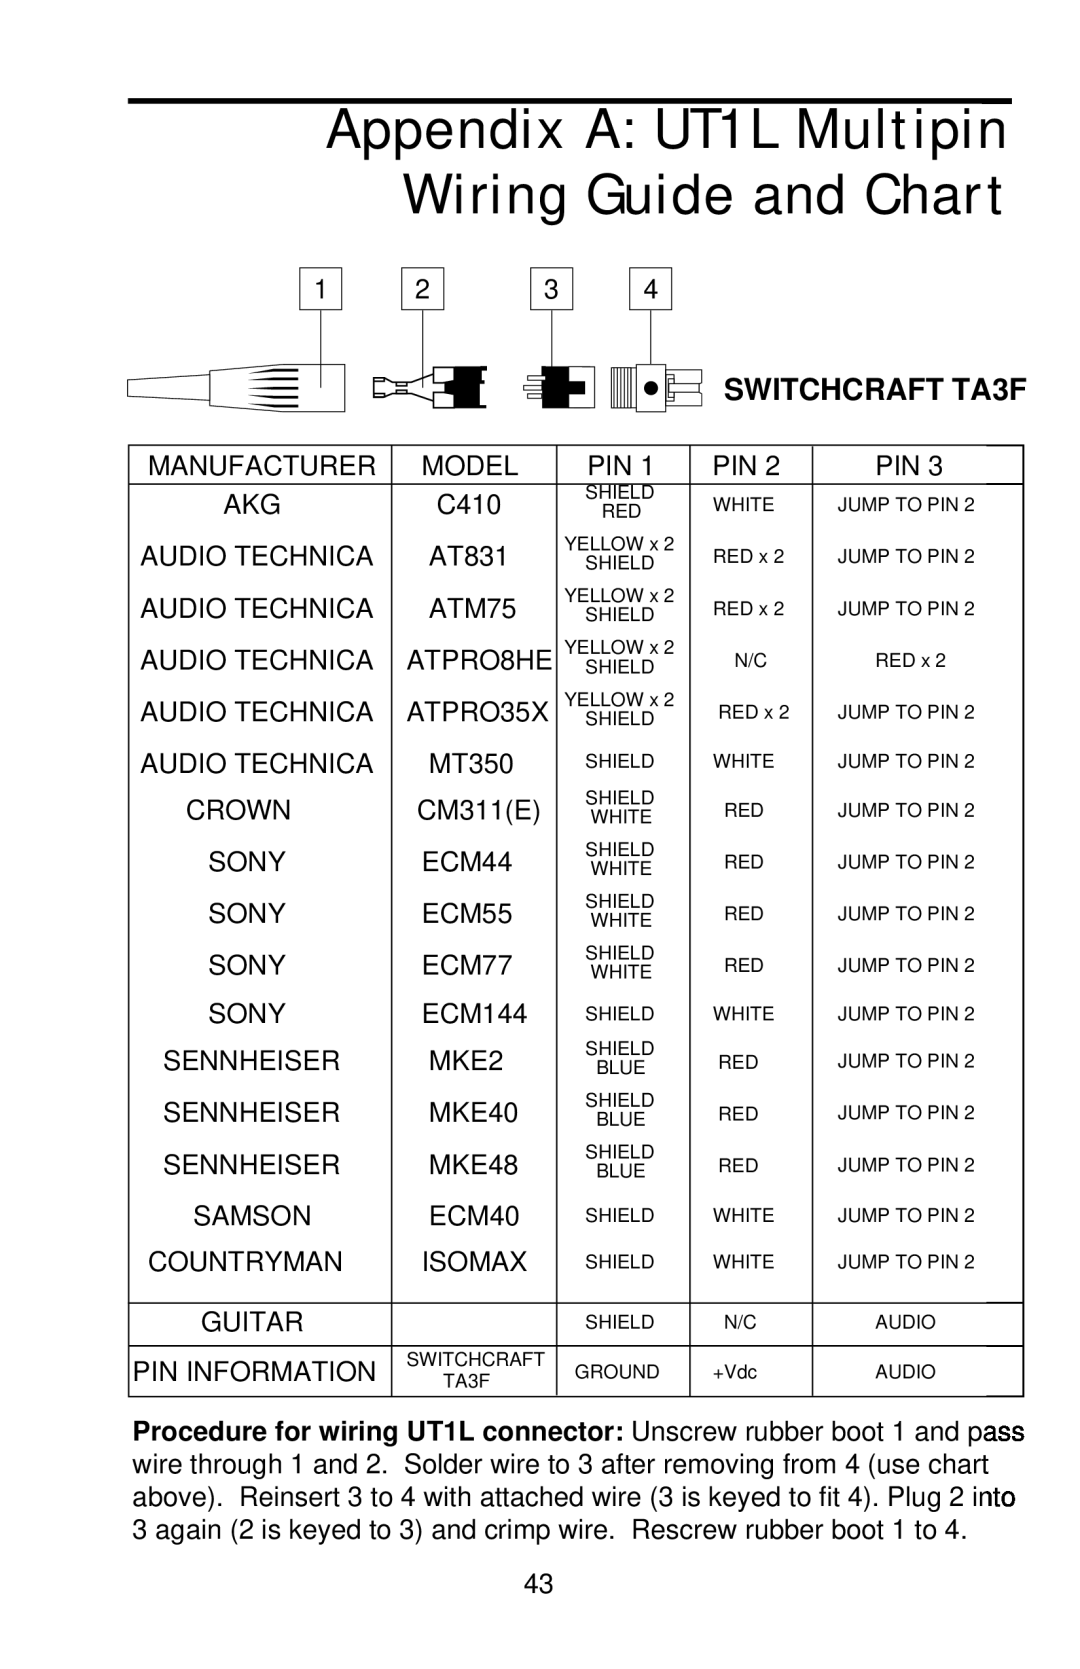 Samson UHF Series One owner manual Appendix A UT1L Multipin Wiring Guide and Chart, SWITCHCRAFT TA3F 